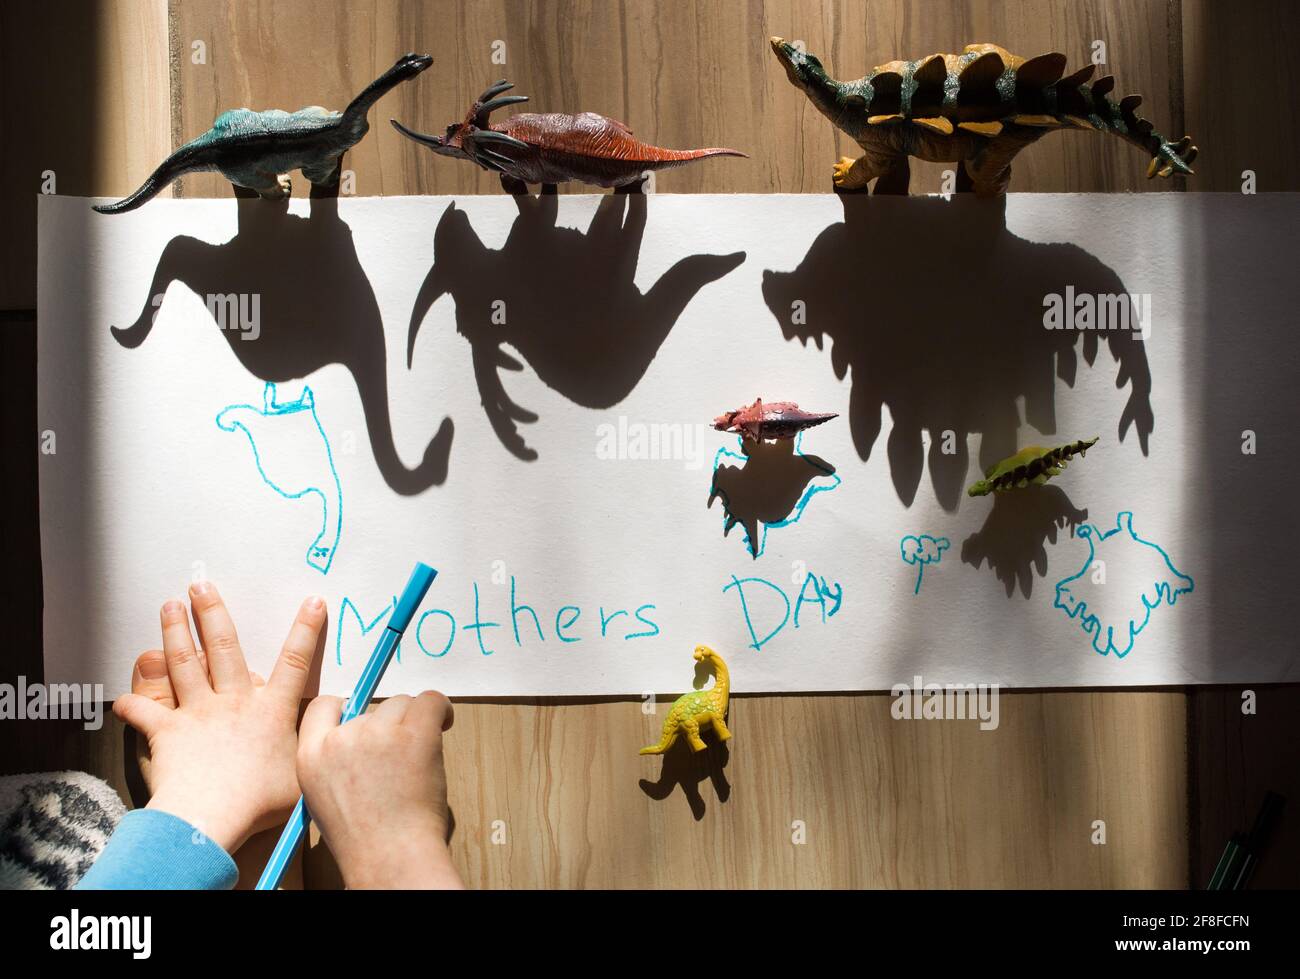 child is preparing a gift for mom for mother's day. outlines shadows of large and small dinosaur toy figures. ideas for creativity, development of fin Stock Photo